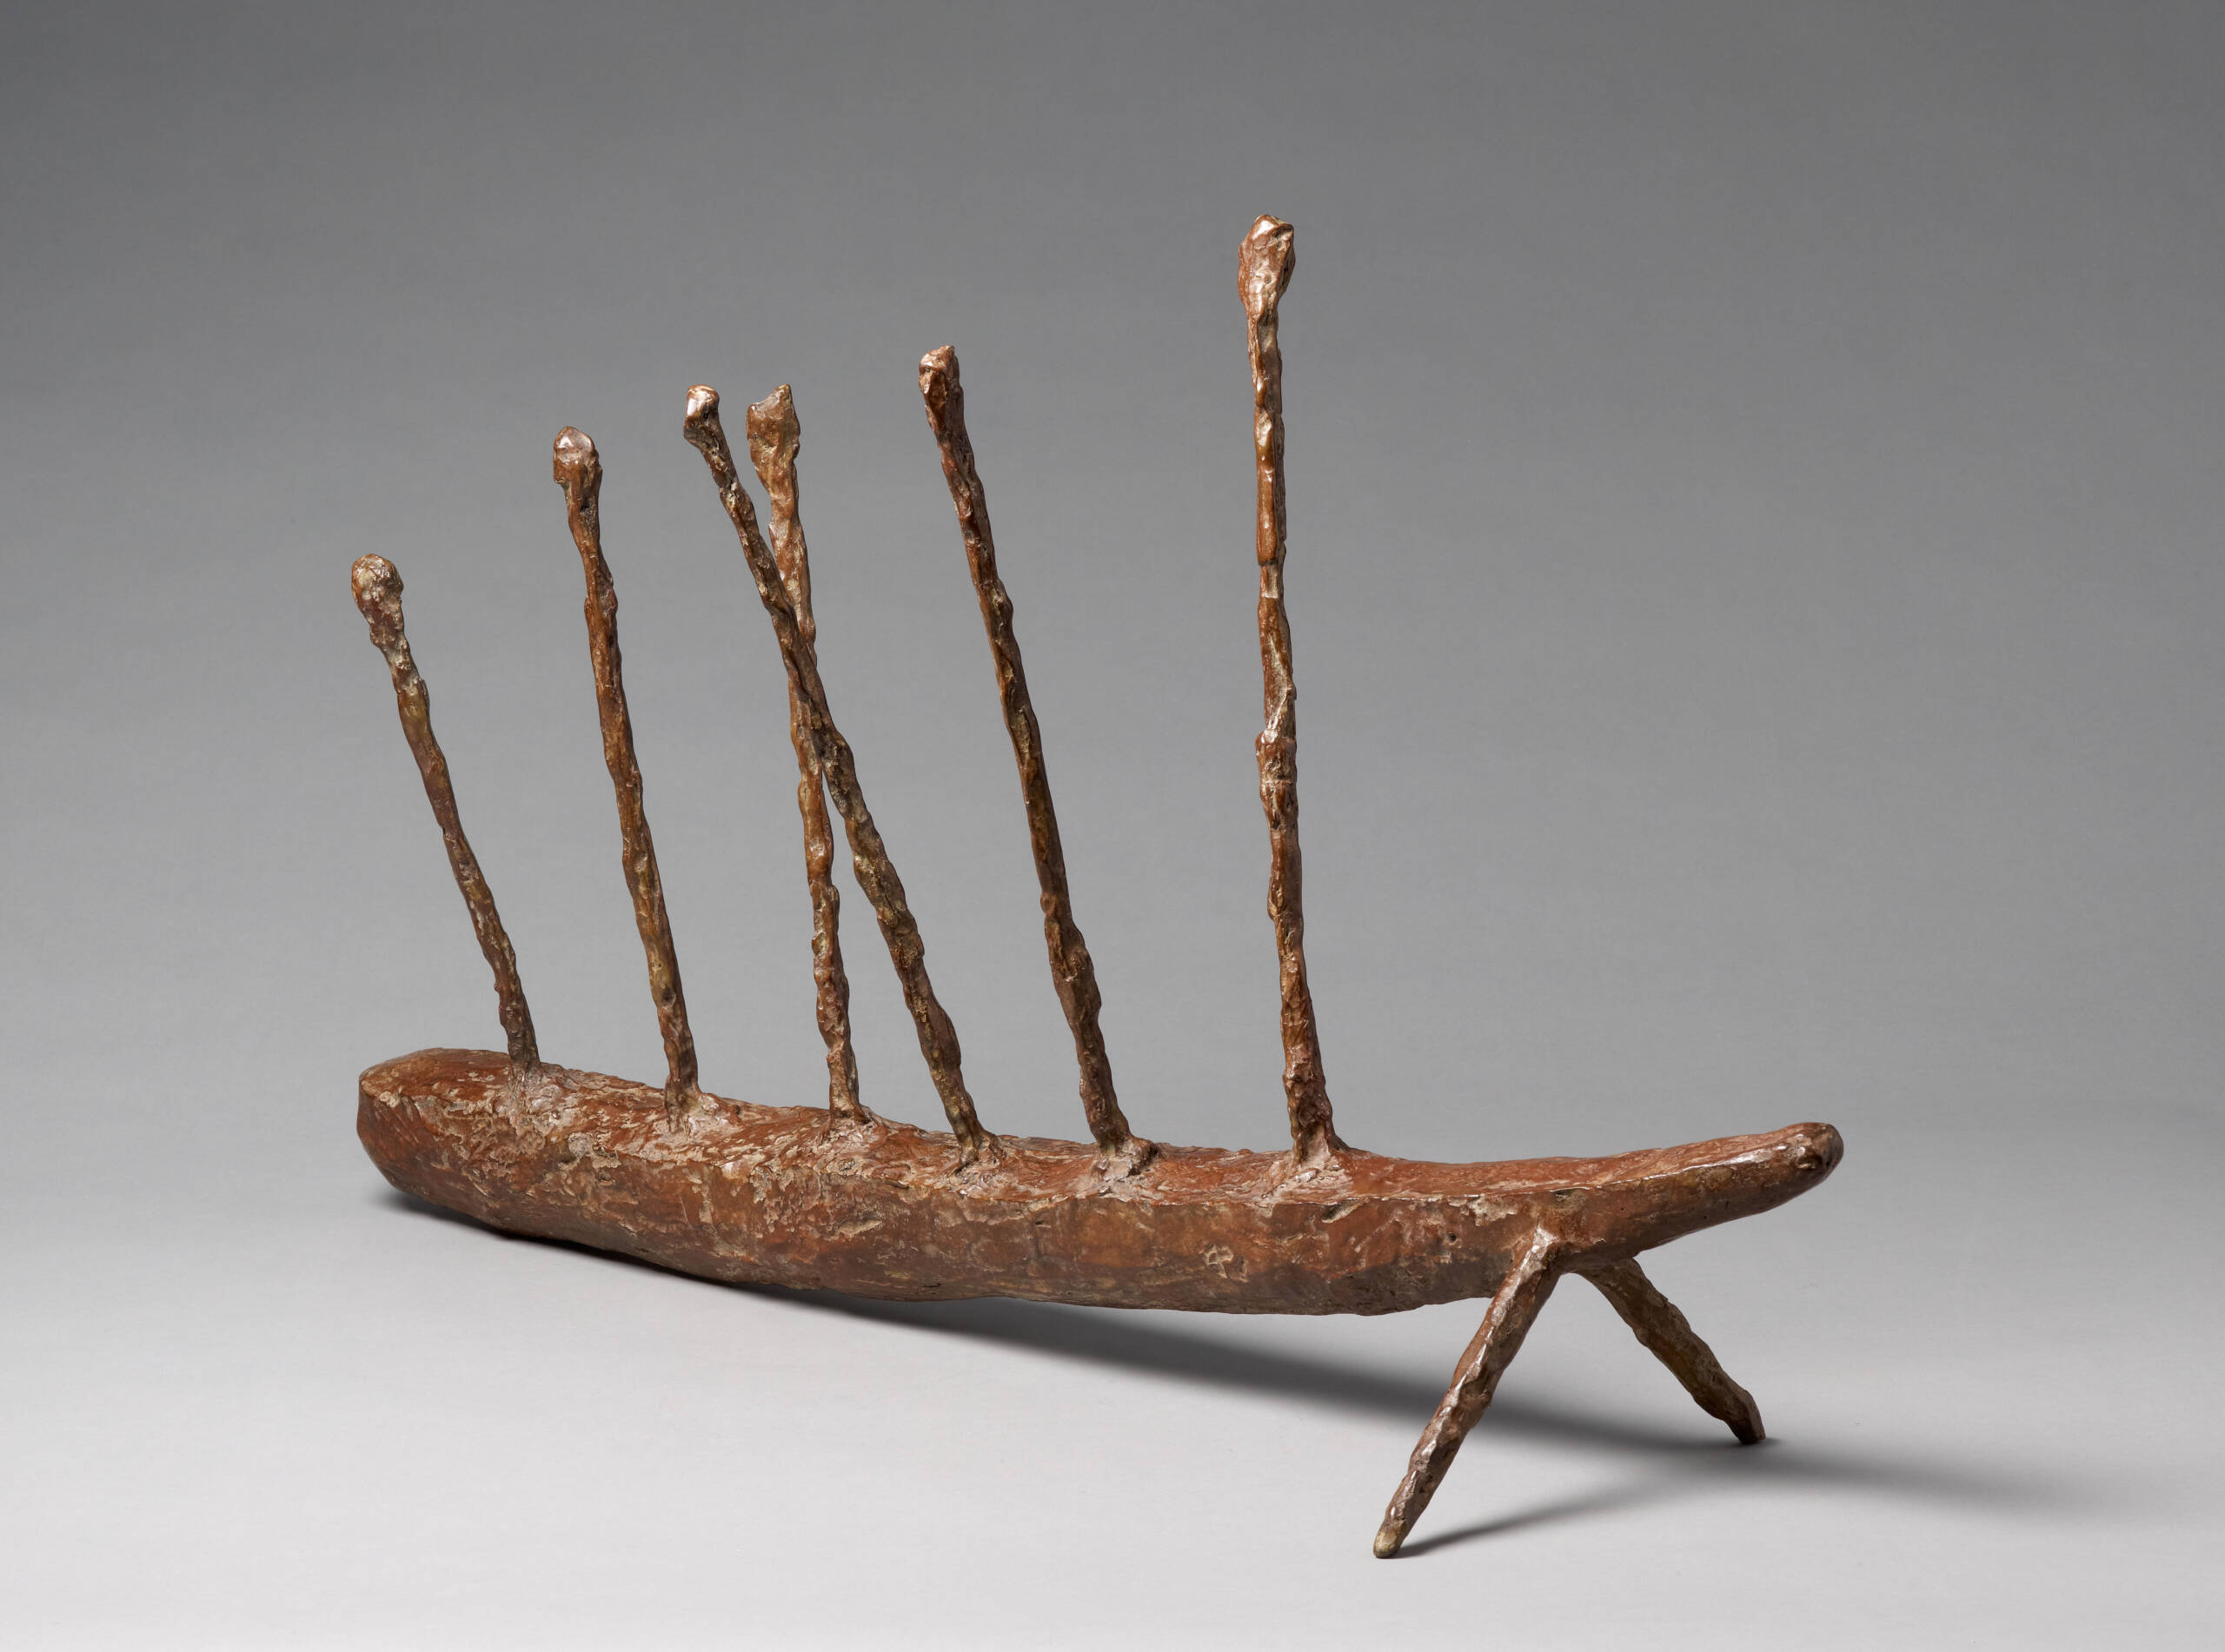 Bronze sculpture of an insect with two front legs a long cylindrical body and six spikes along back